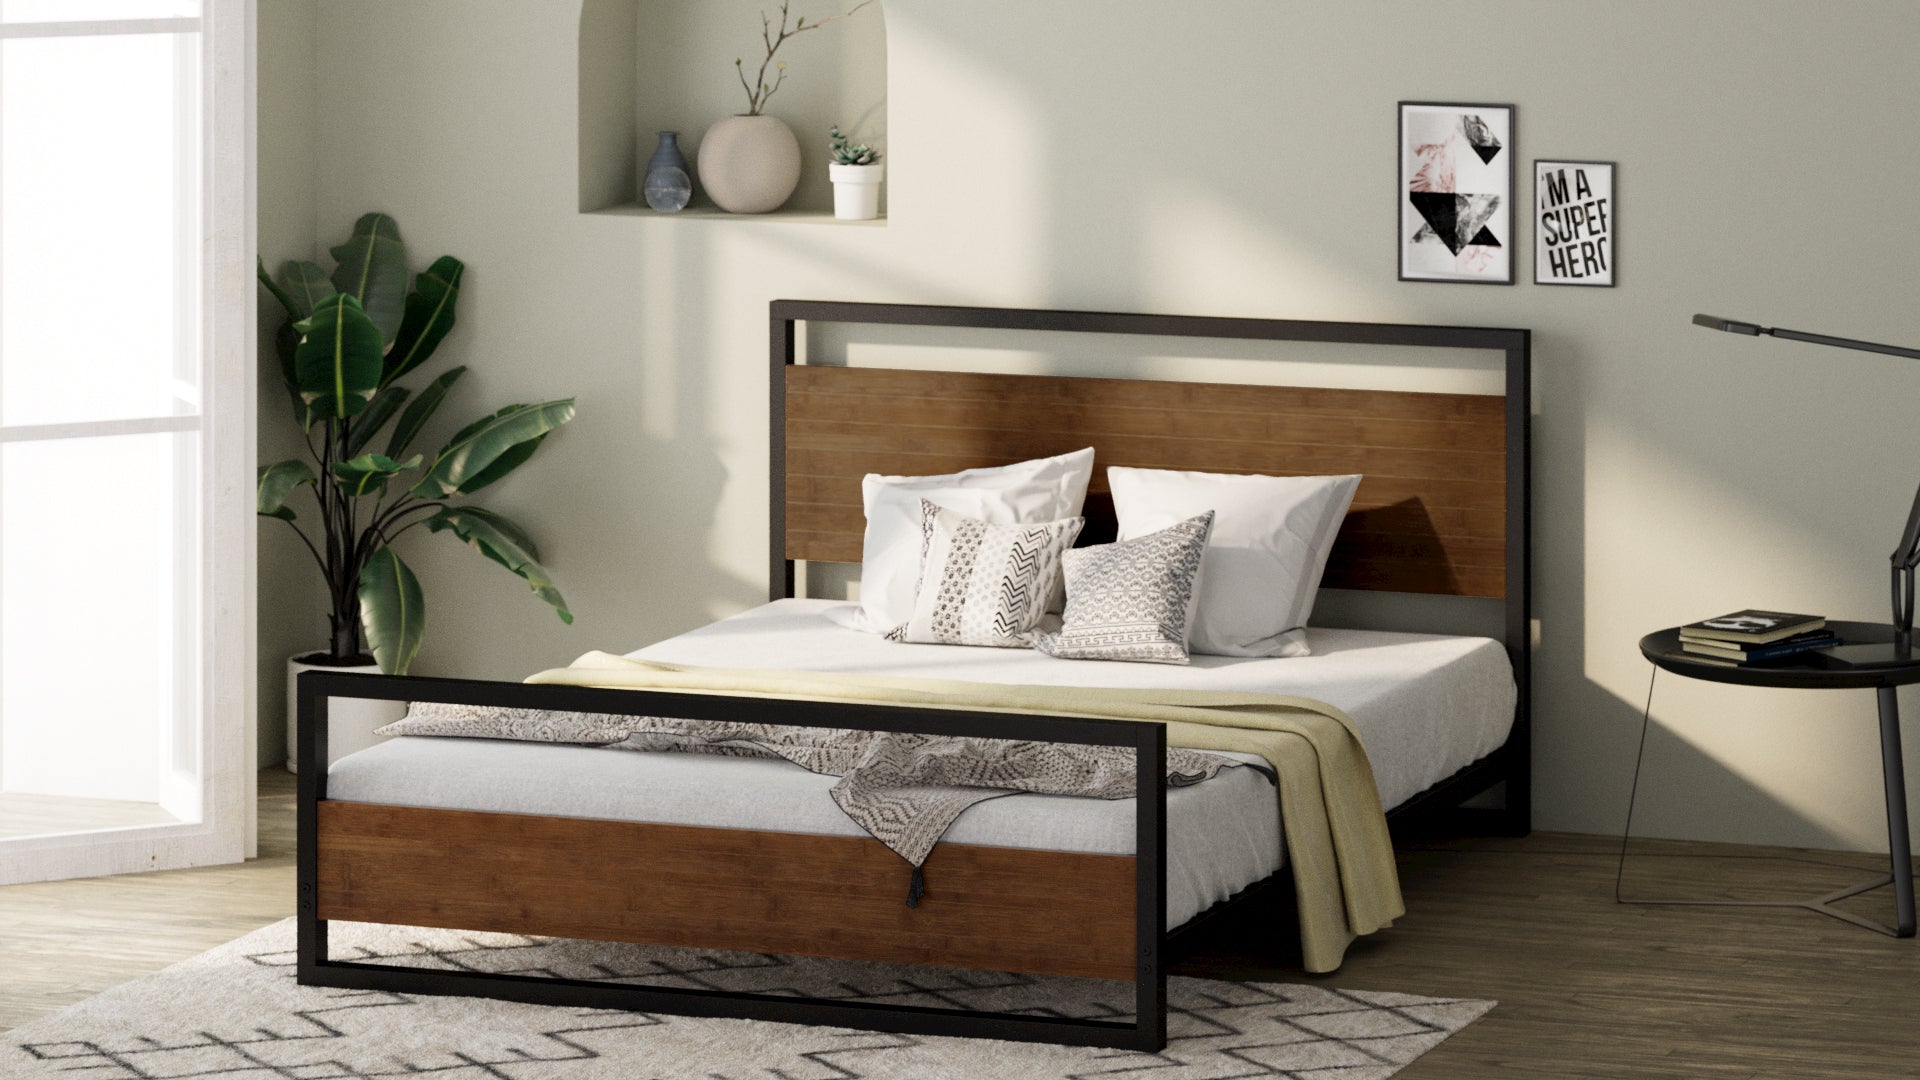 Zinus_Suzanne_Metal_and_Wood_Platform_Bed_with_Headboard_and_Footboard.jpg